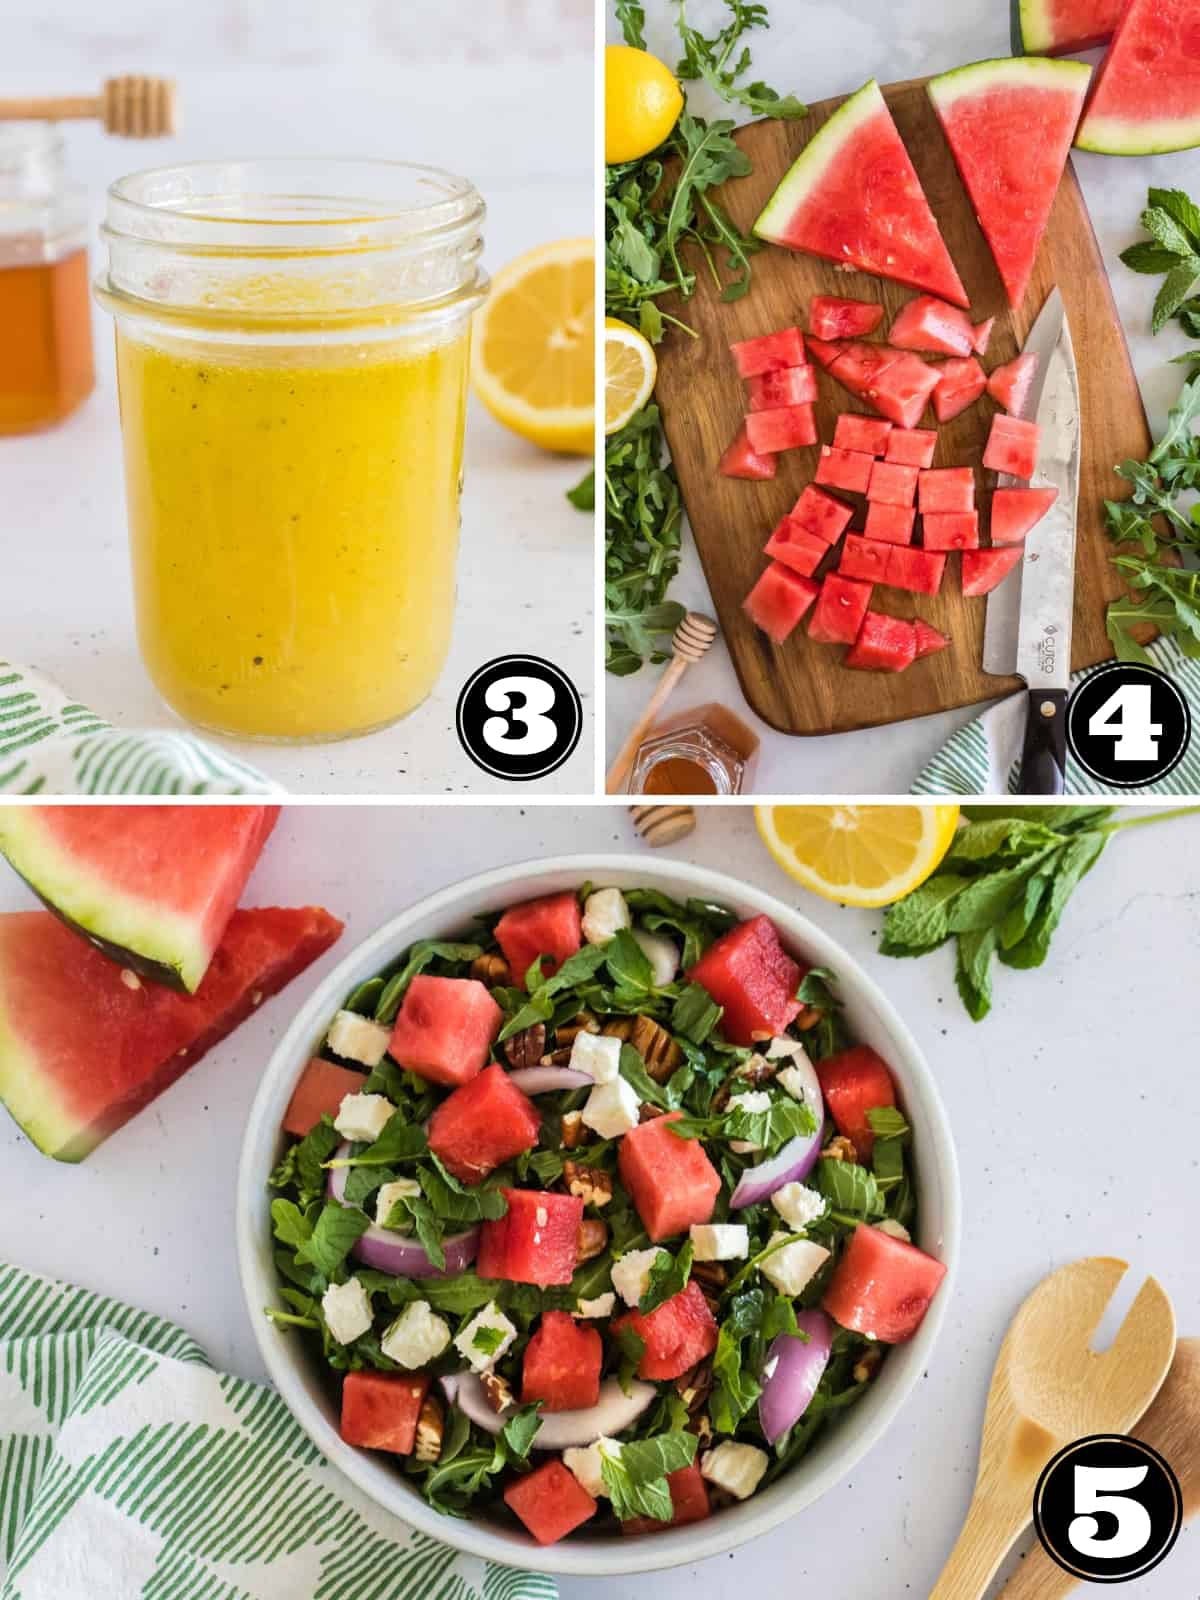 Collage image showing a jar of lemon salad dressing, watermelon being cut on a board, and a bowl of salad.